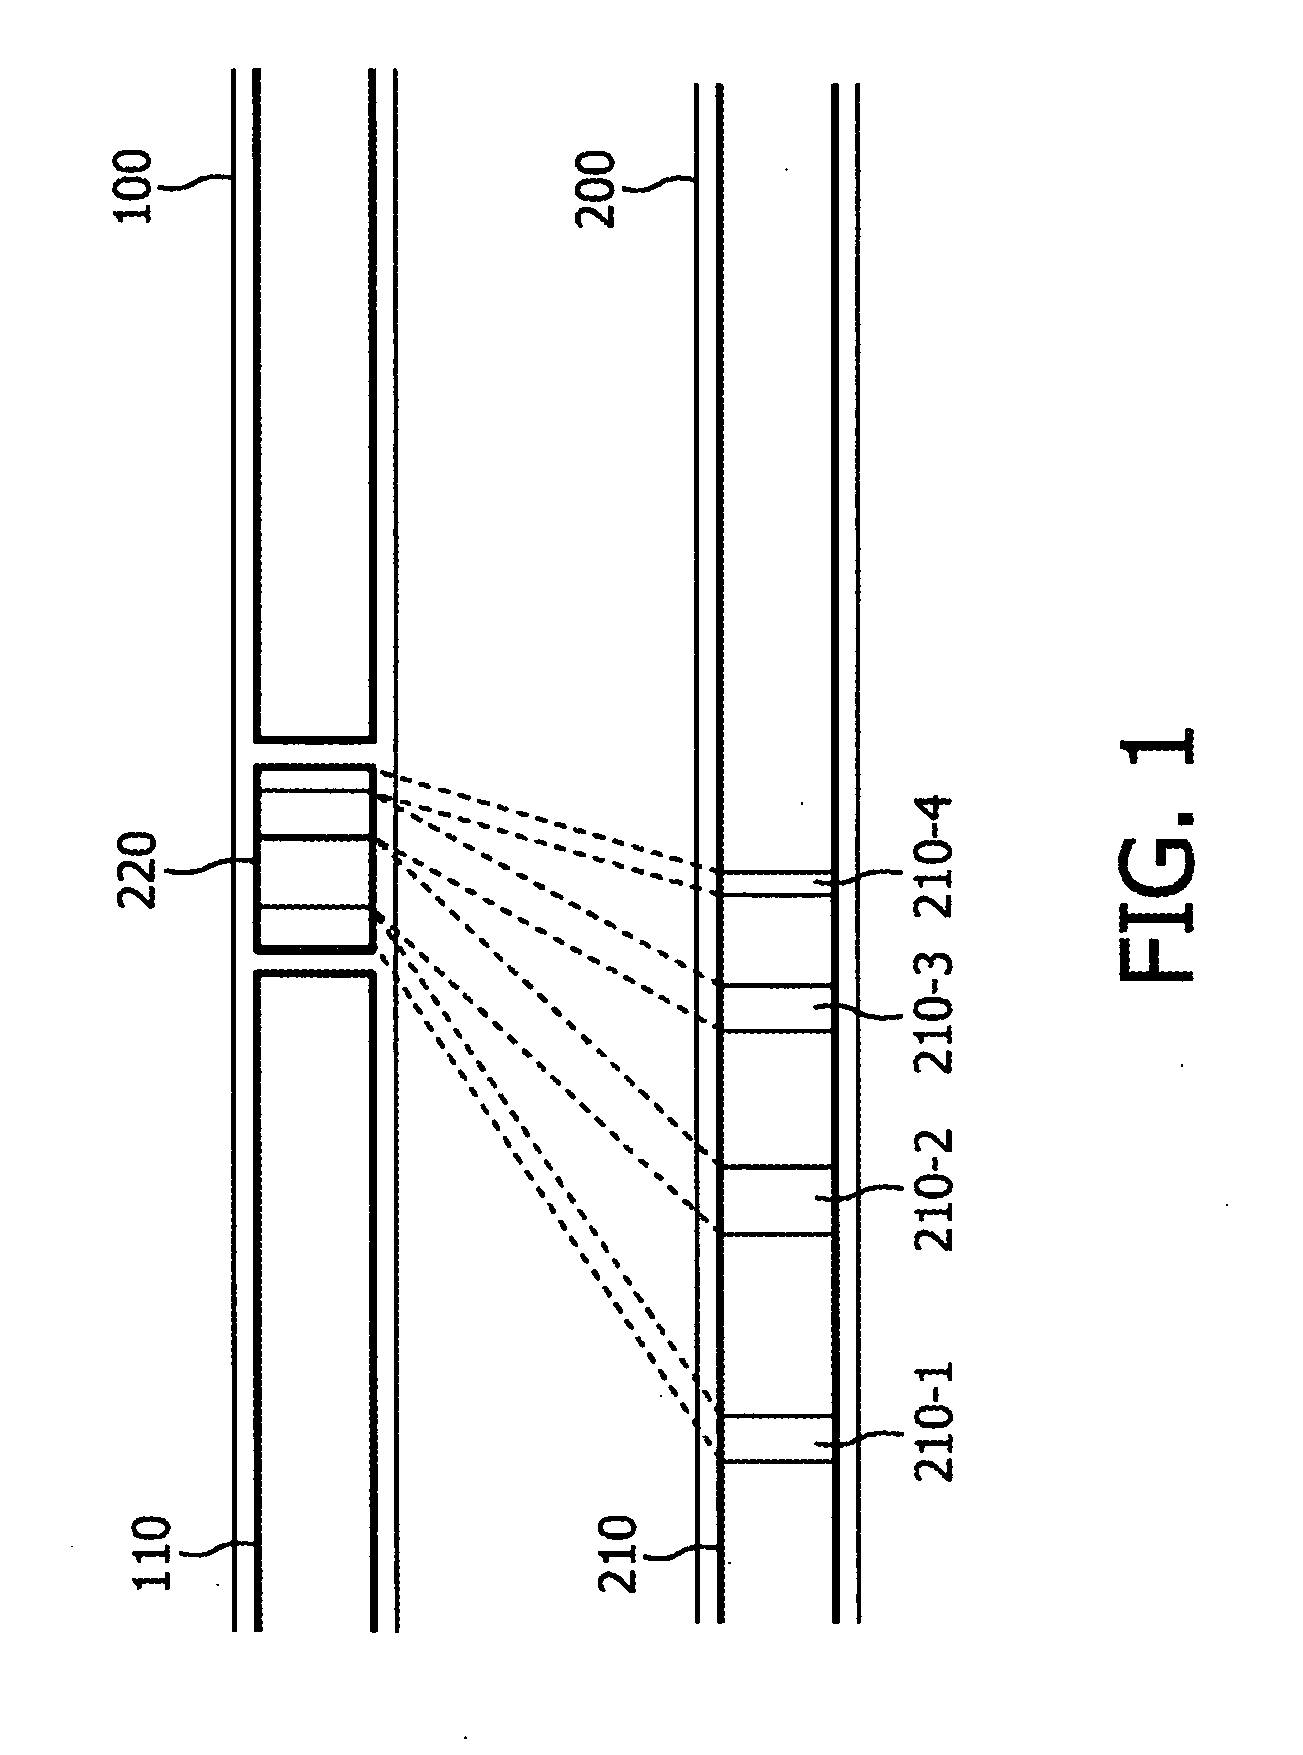 Method of content substitution